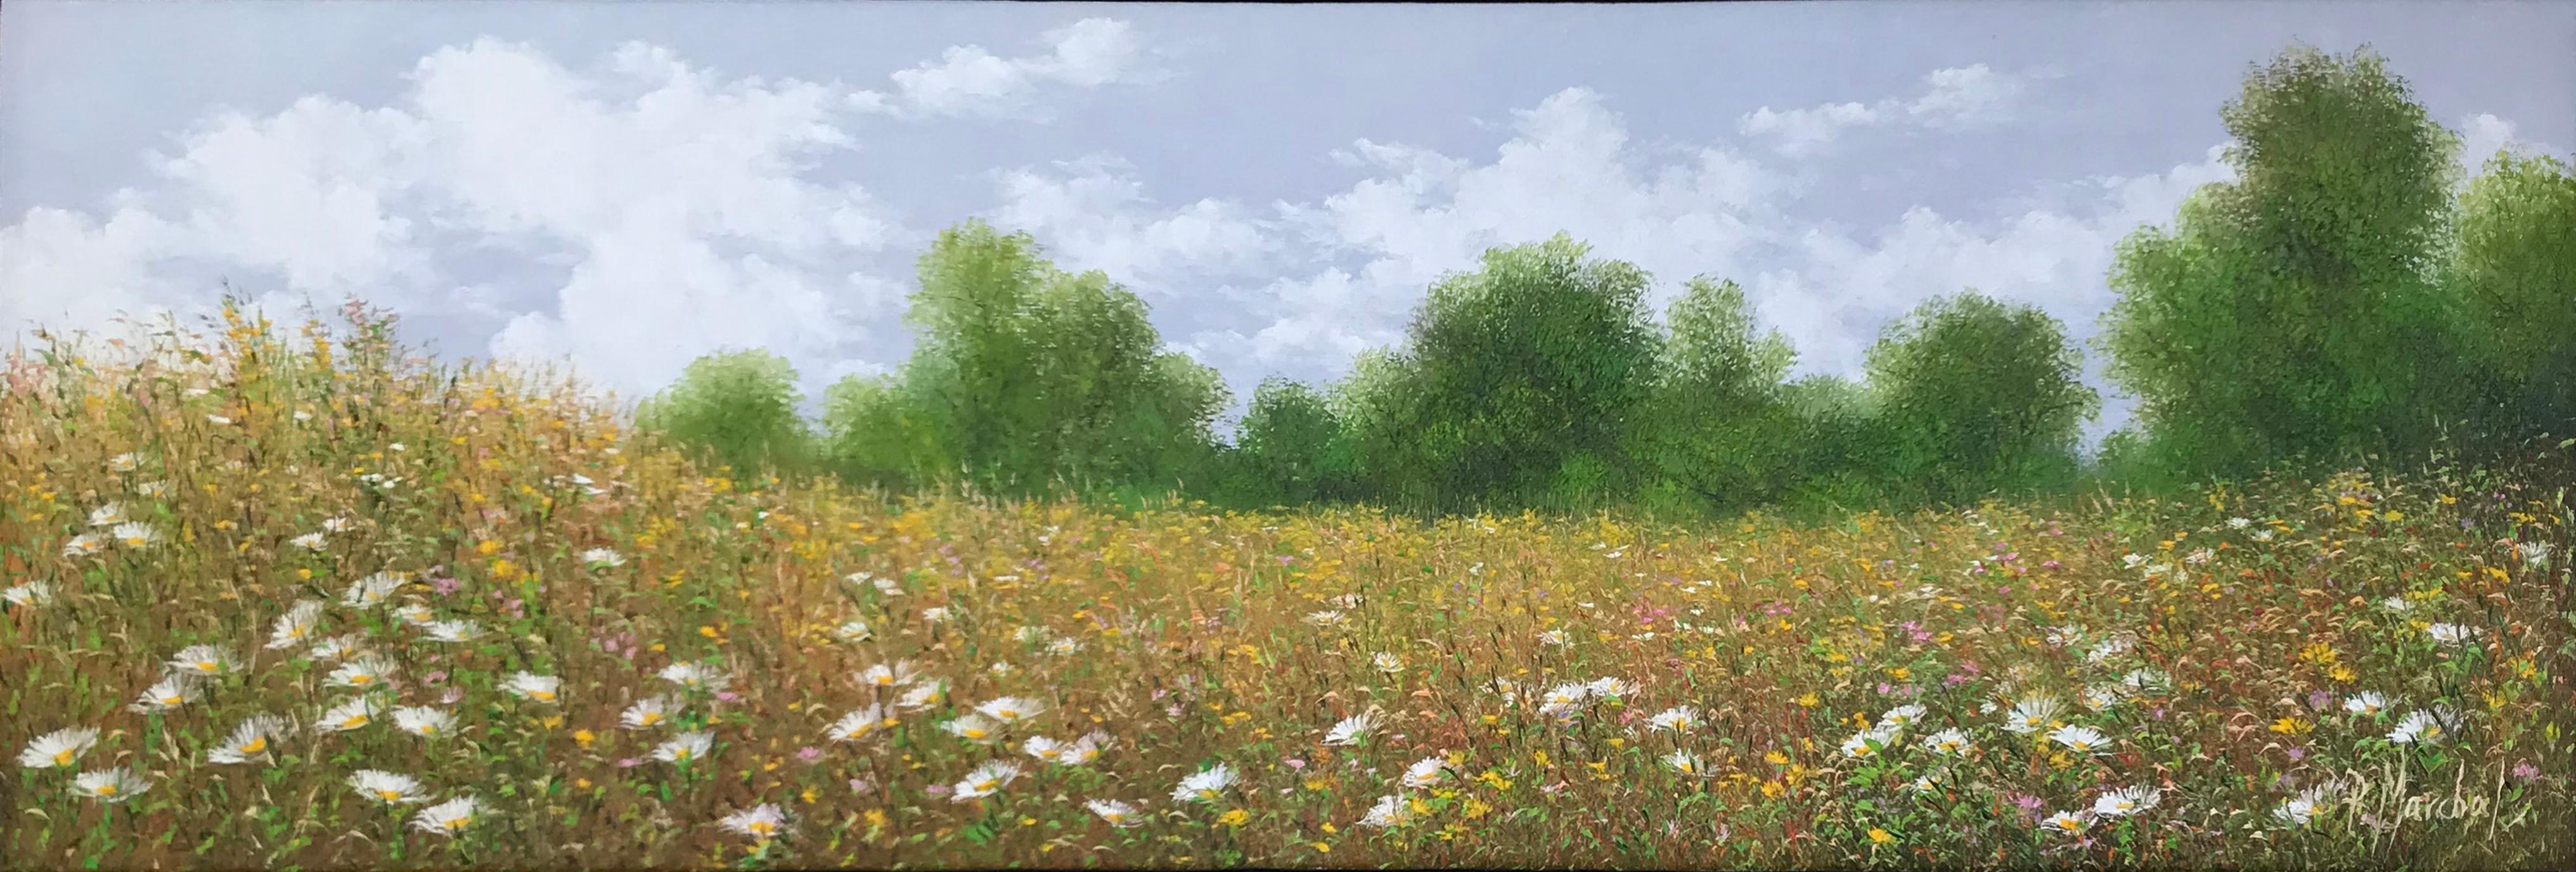 Patrice Marchal Landscape Painting - Champ fleuri , 2019, oil painting on canvas , size with frame 25.4 x 65.4 cm 